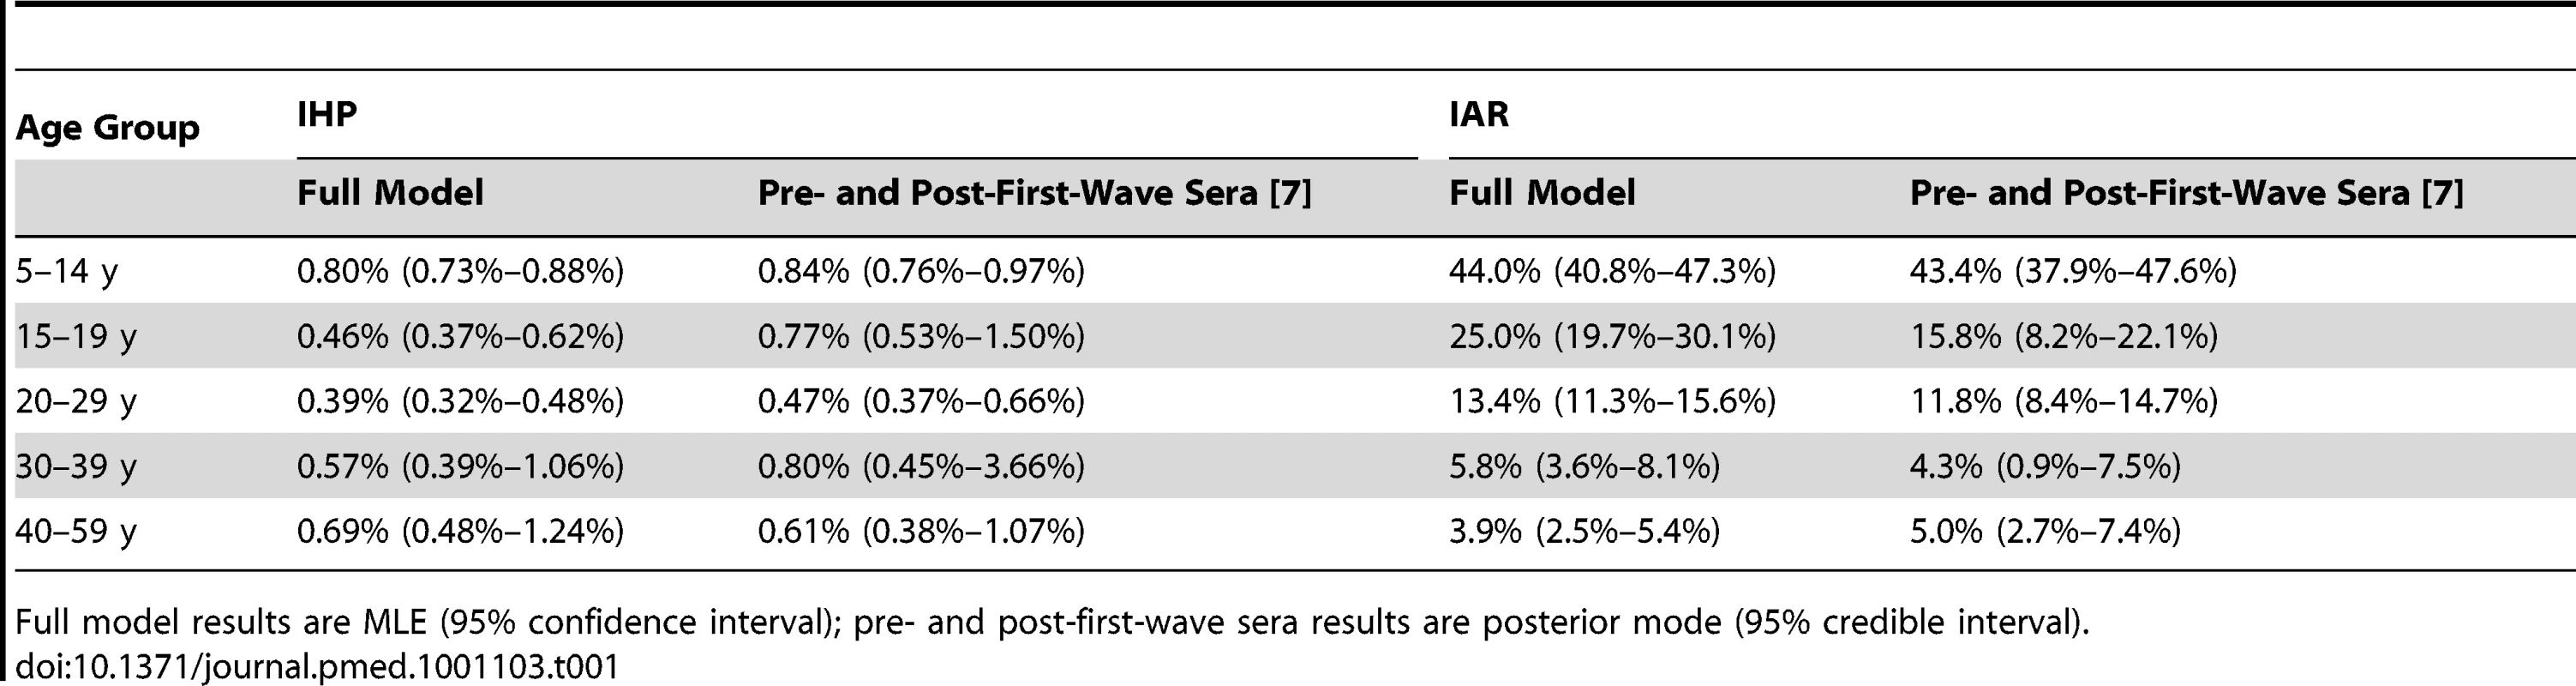 Comparison of the estimates of IHP and IAR in the full model with those from our previous study, which used only the pre- and post-first-wave sera <em class=&quot;ref&quot;>[7]</em>.